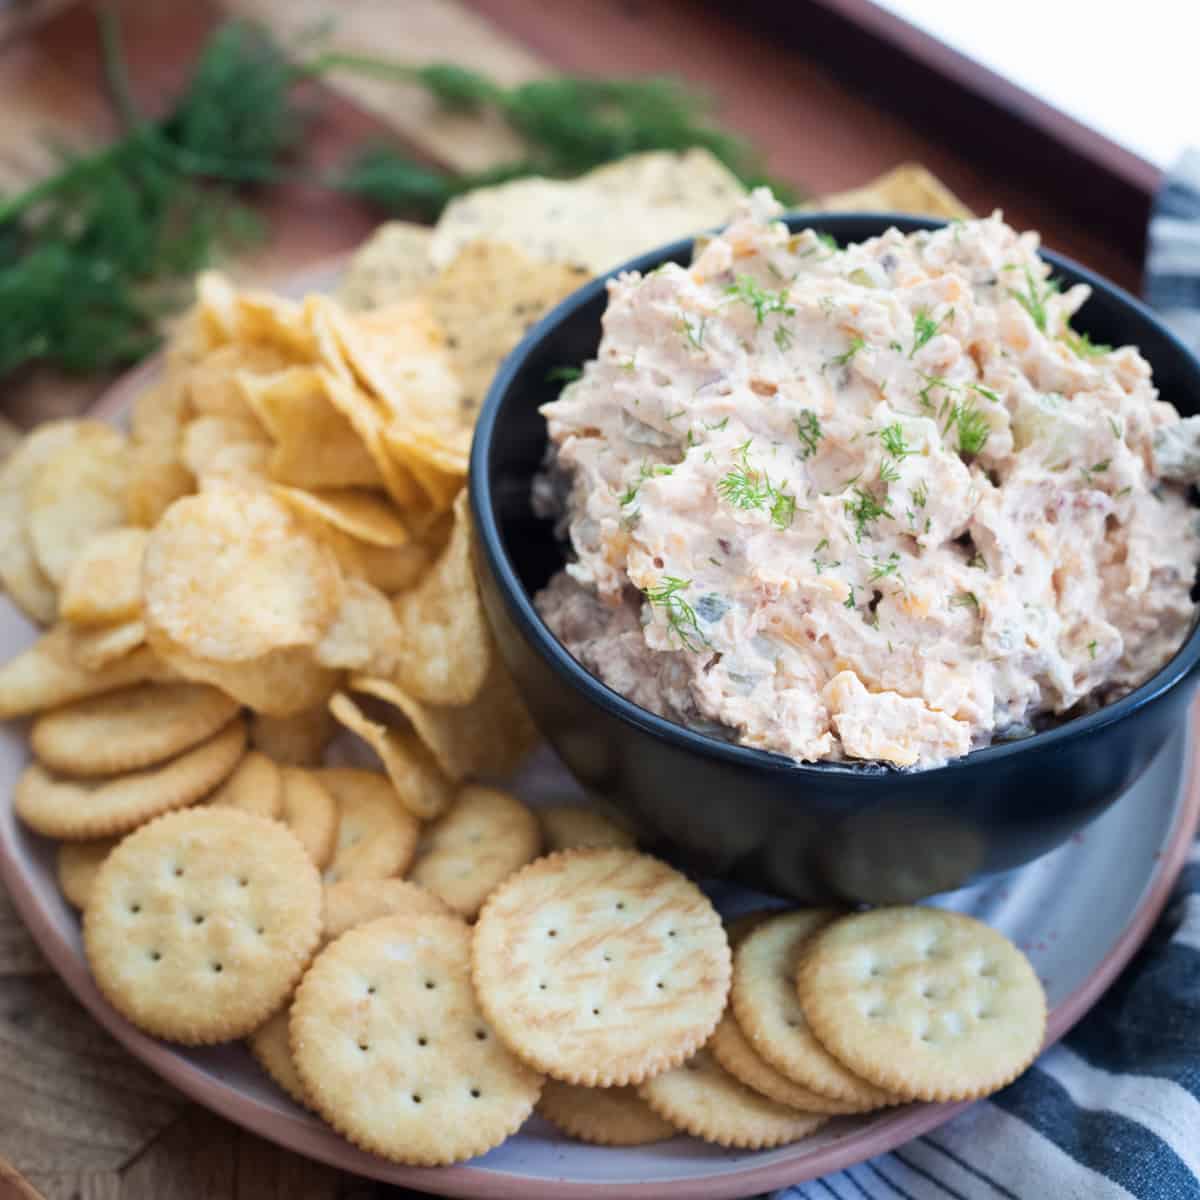 Pickle popper dip in a serving bowl surrounded by crackers and chips.